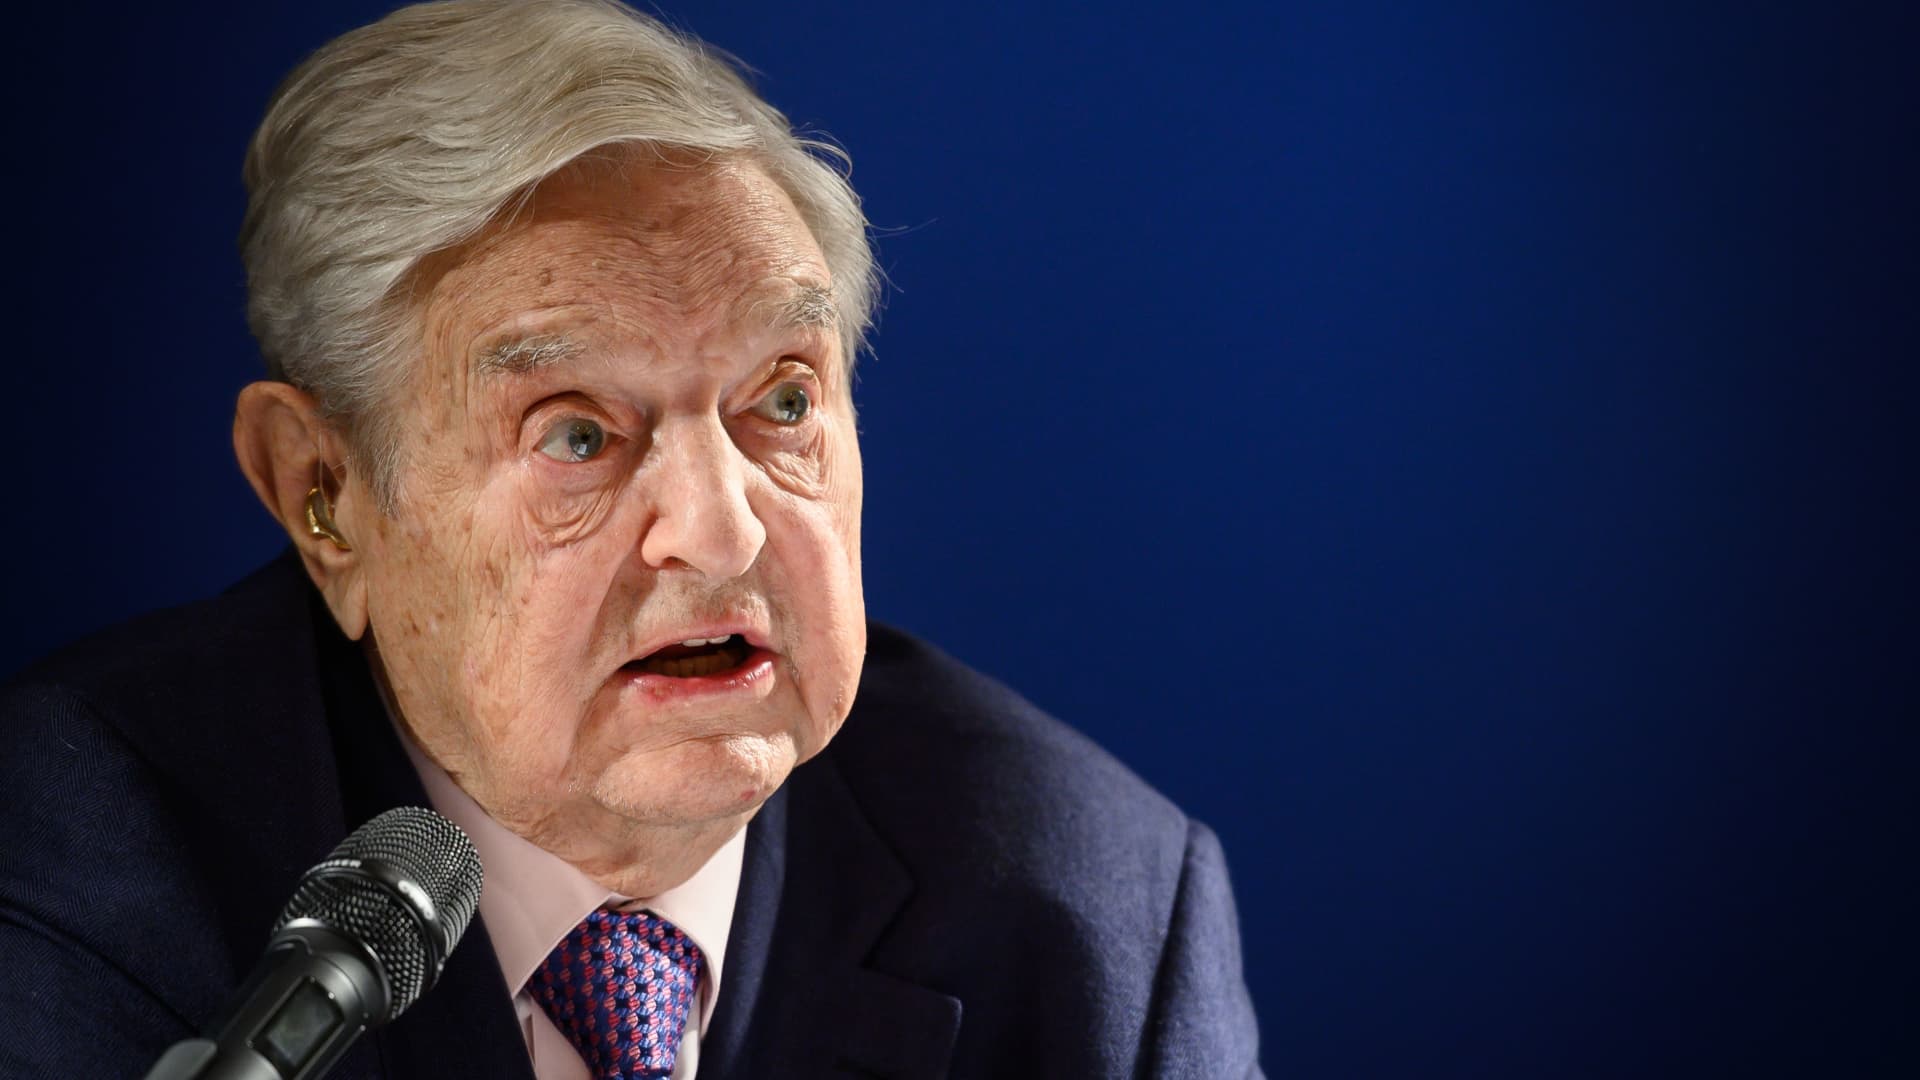 George Soros says Russia is blackmailing Europe with fuel